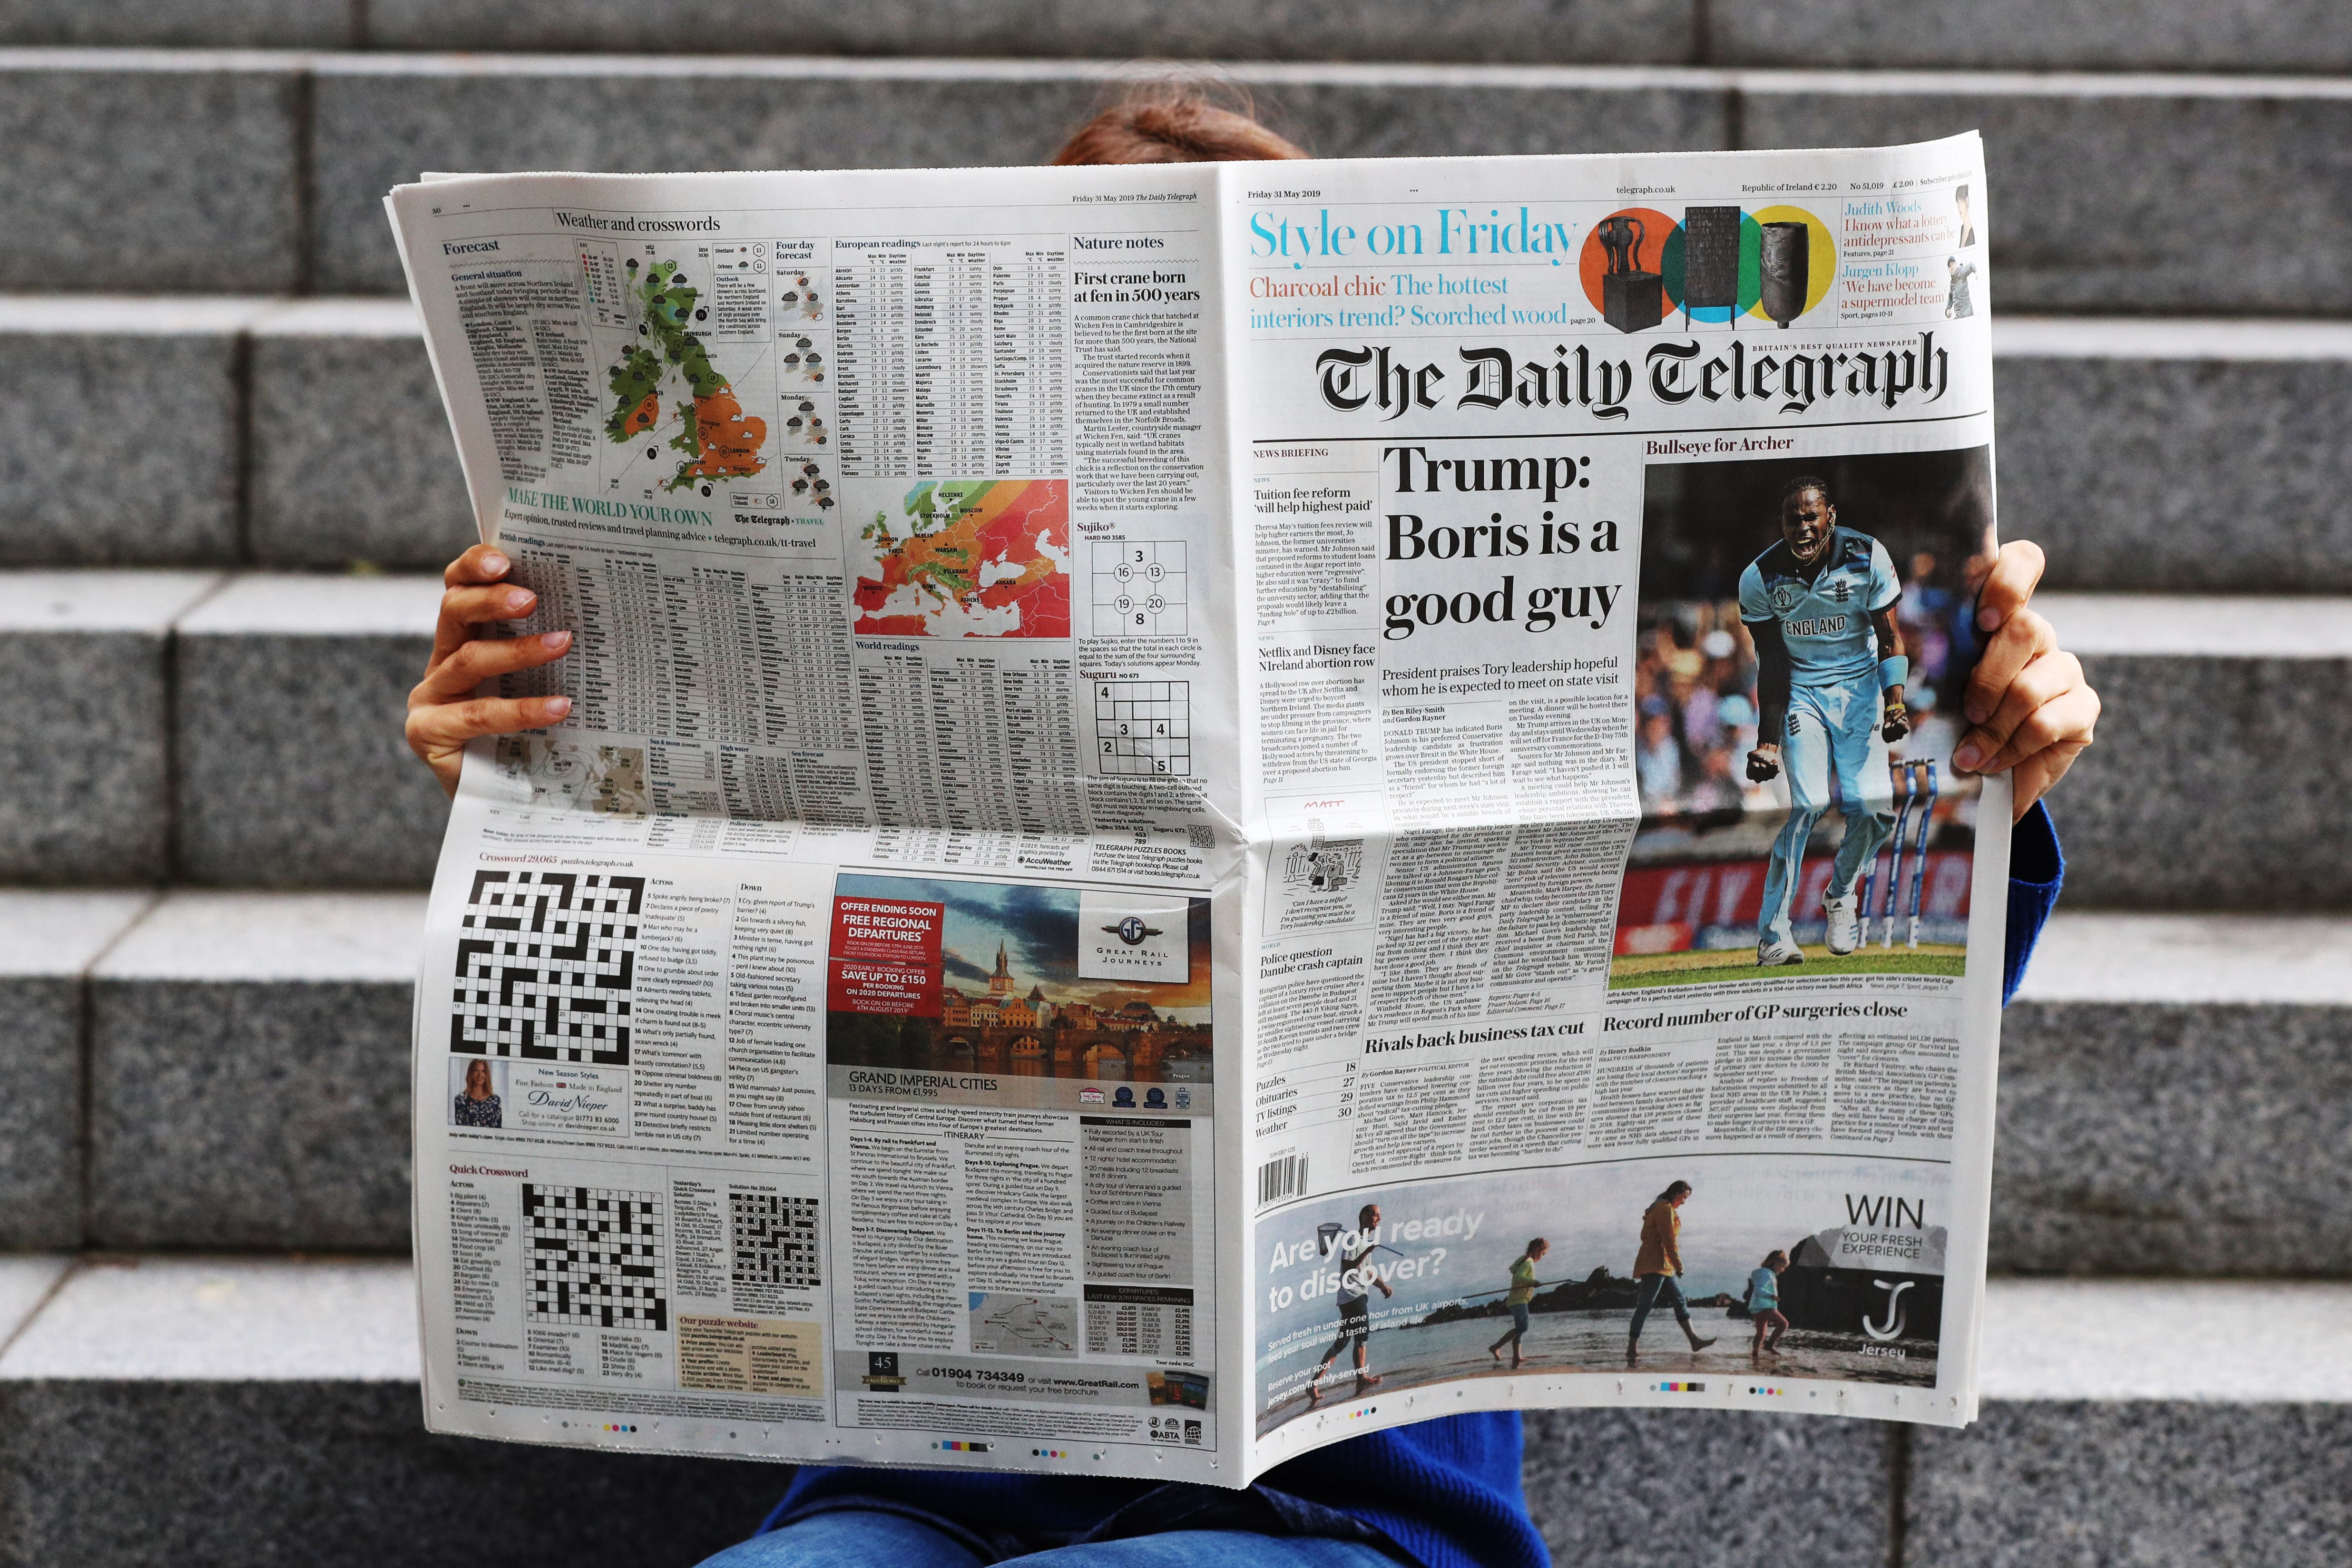 MPs have expressed concern over a takeover bid for The Daily Telegraph